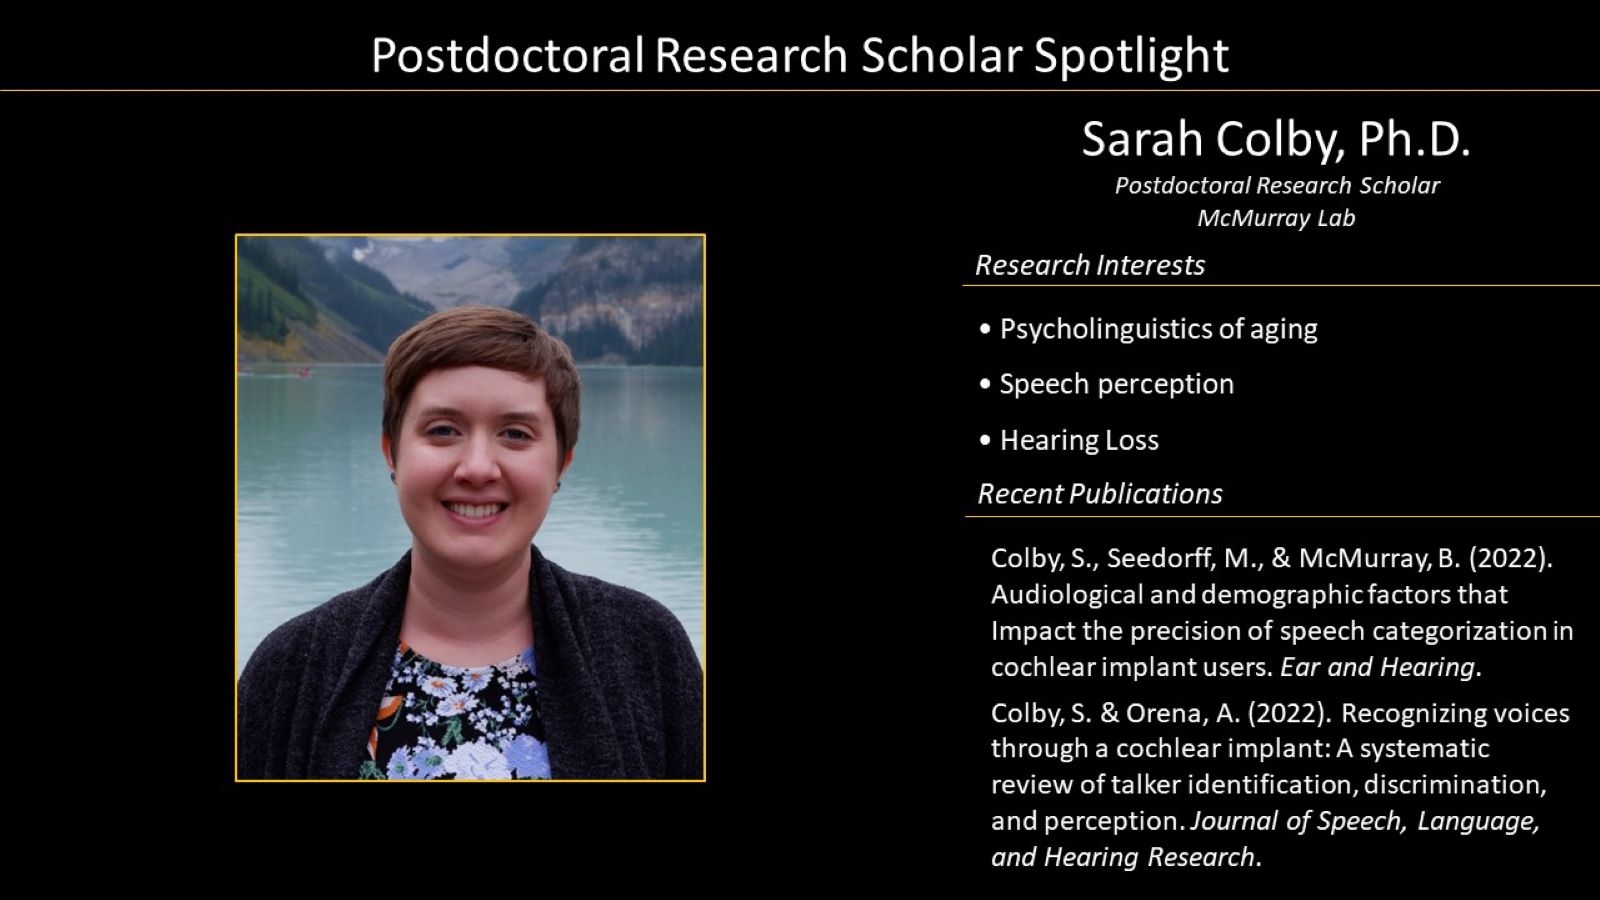 Postdoctoral Research Scholar Sarah Colby with Photo